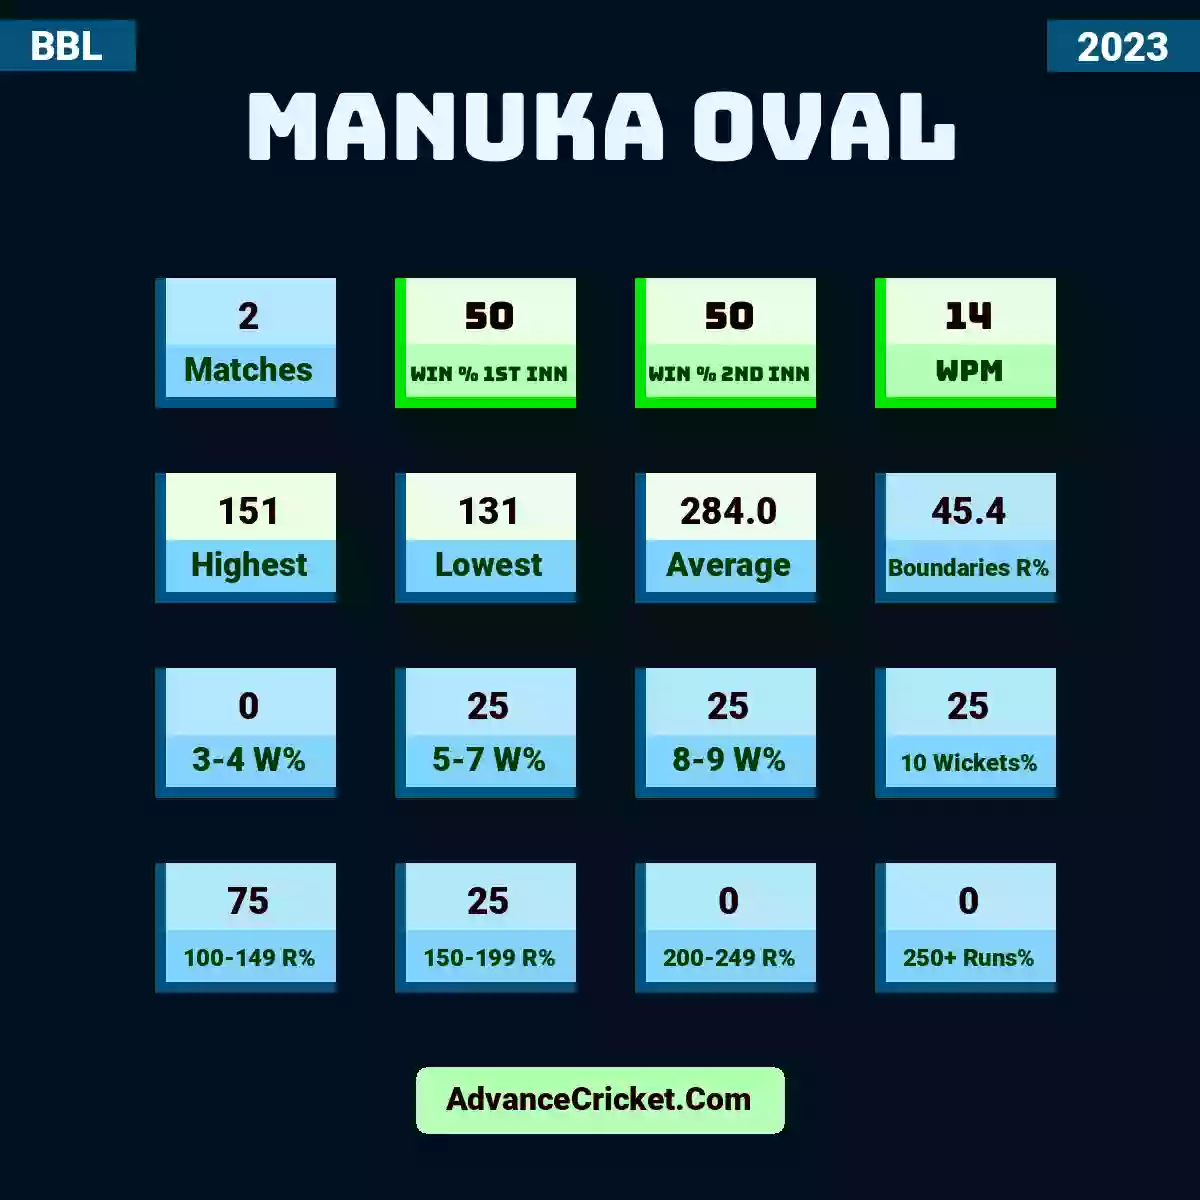 Image showing Manuka Oval with Matches: 2, Win % 1st Inn: 50, Win % 2nd Inn: 50, WPM: 14, Highest: 151, Lowest: 131, Average: 284.0, Boundaries R%: 45.4, 3-4 W%: 0, 5-7 W%: 25, 8-9 W%: 25, 10 Wickets%: 25, 100-149 R%: 75, 150-199 R%: 25, 200-249 R%: 0, 250+ Runs%: 0.